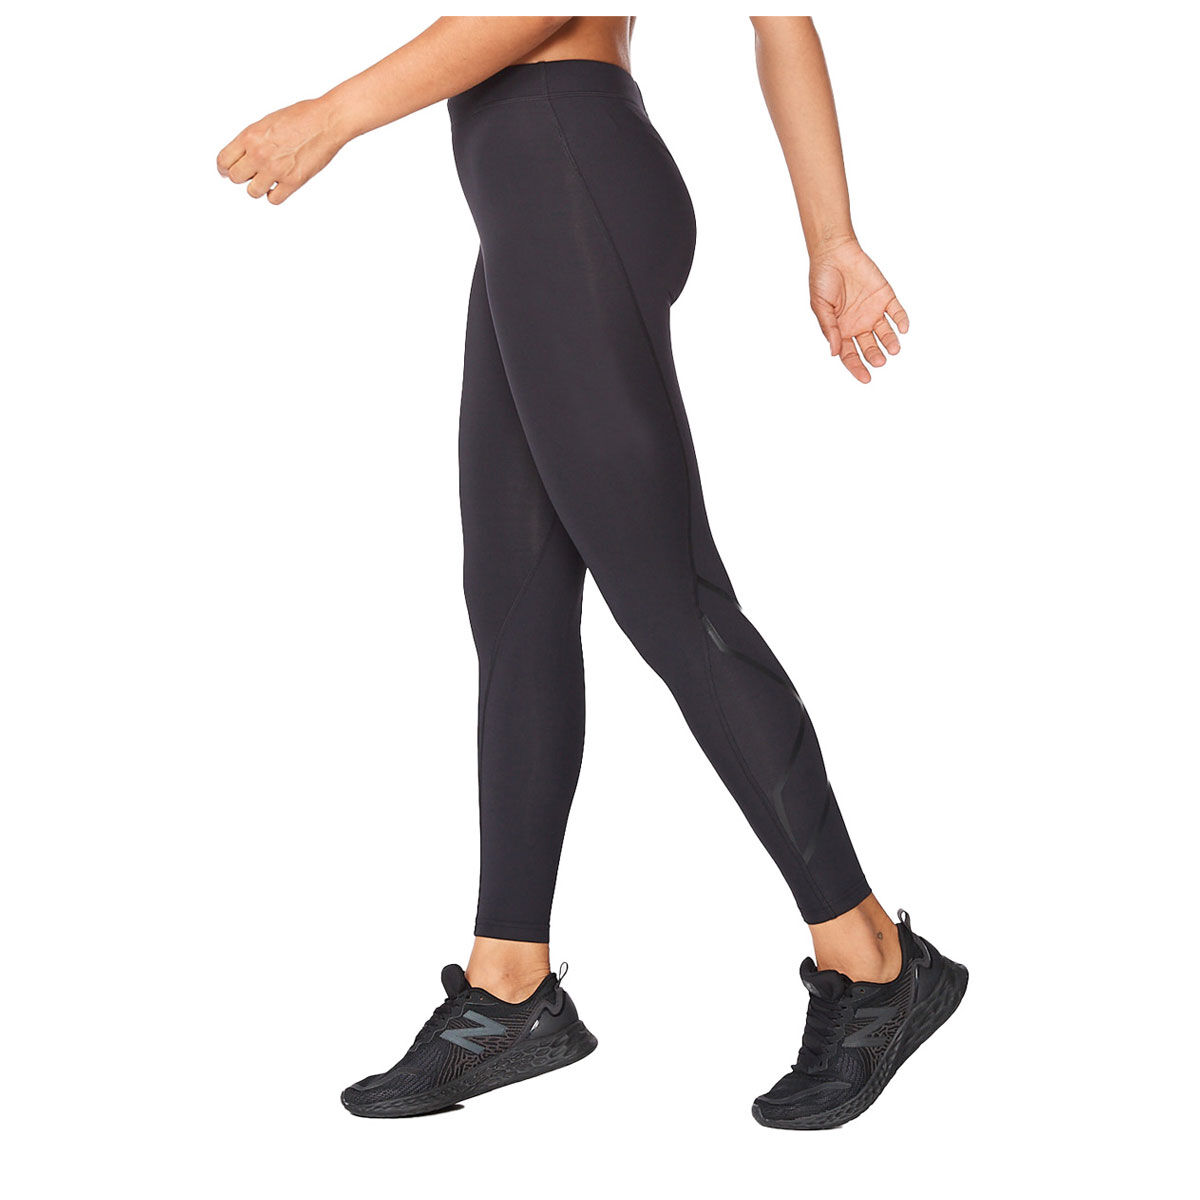 Authentic NEW 2XU Women Compression Tights - Variations